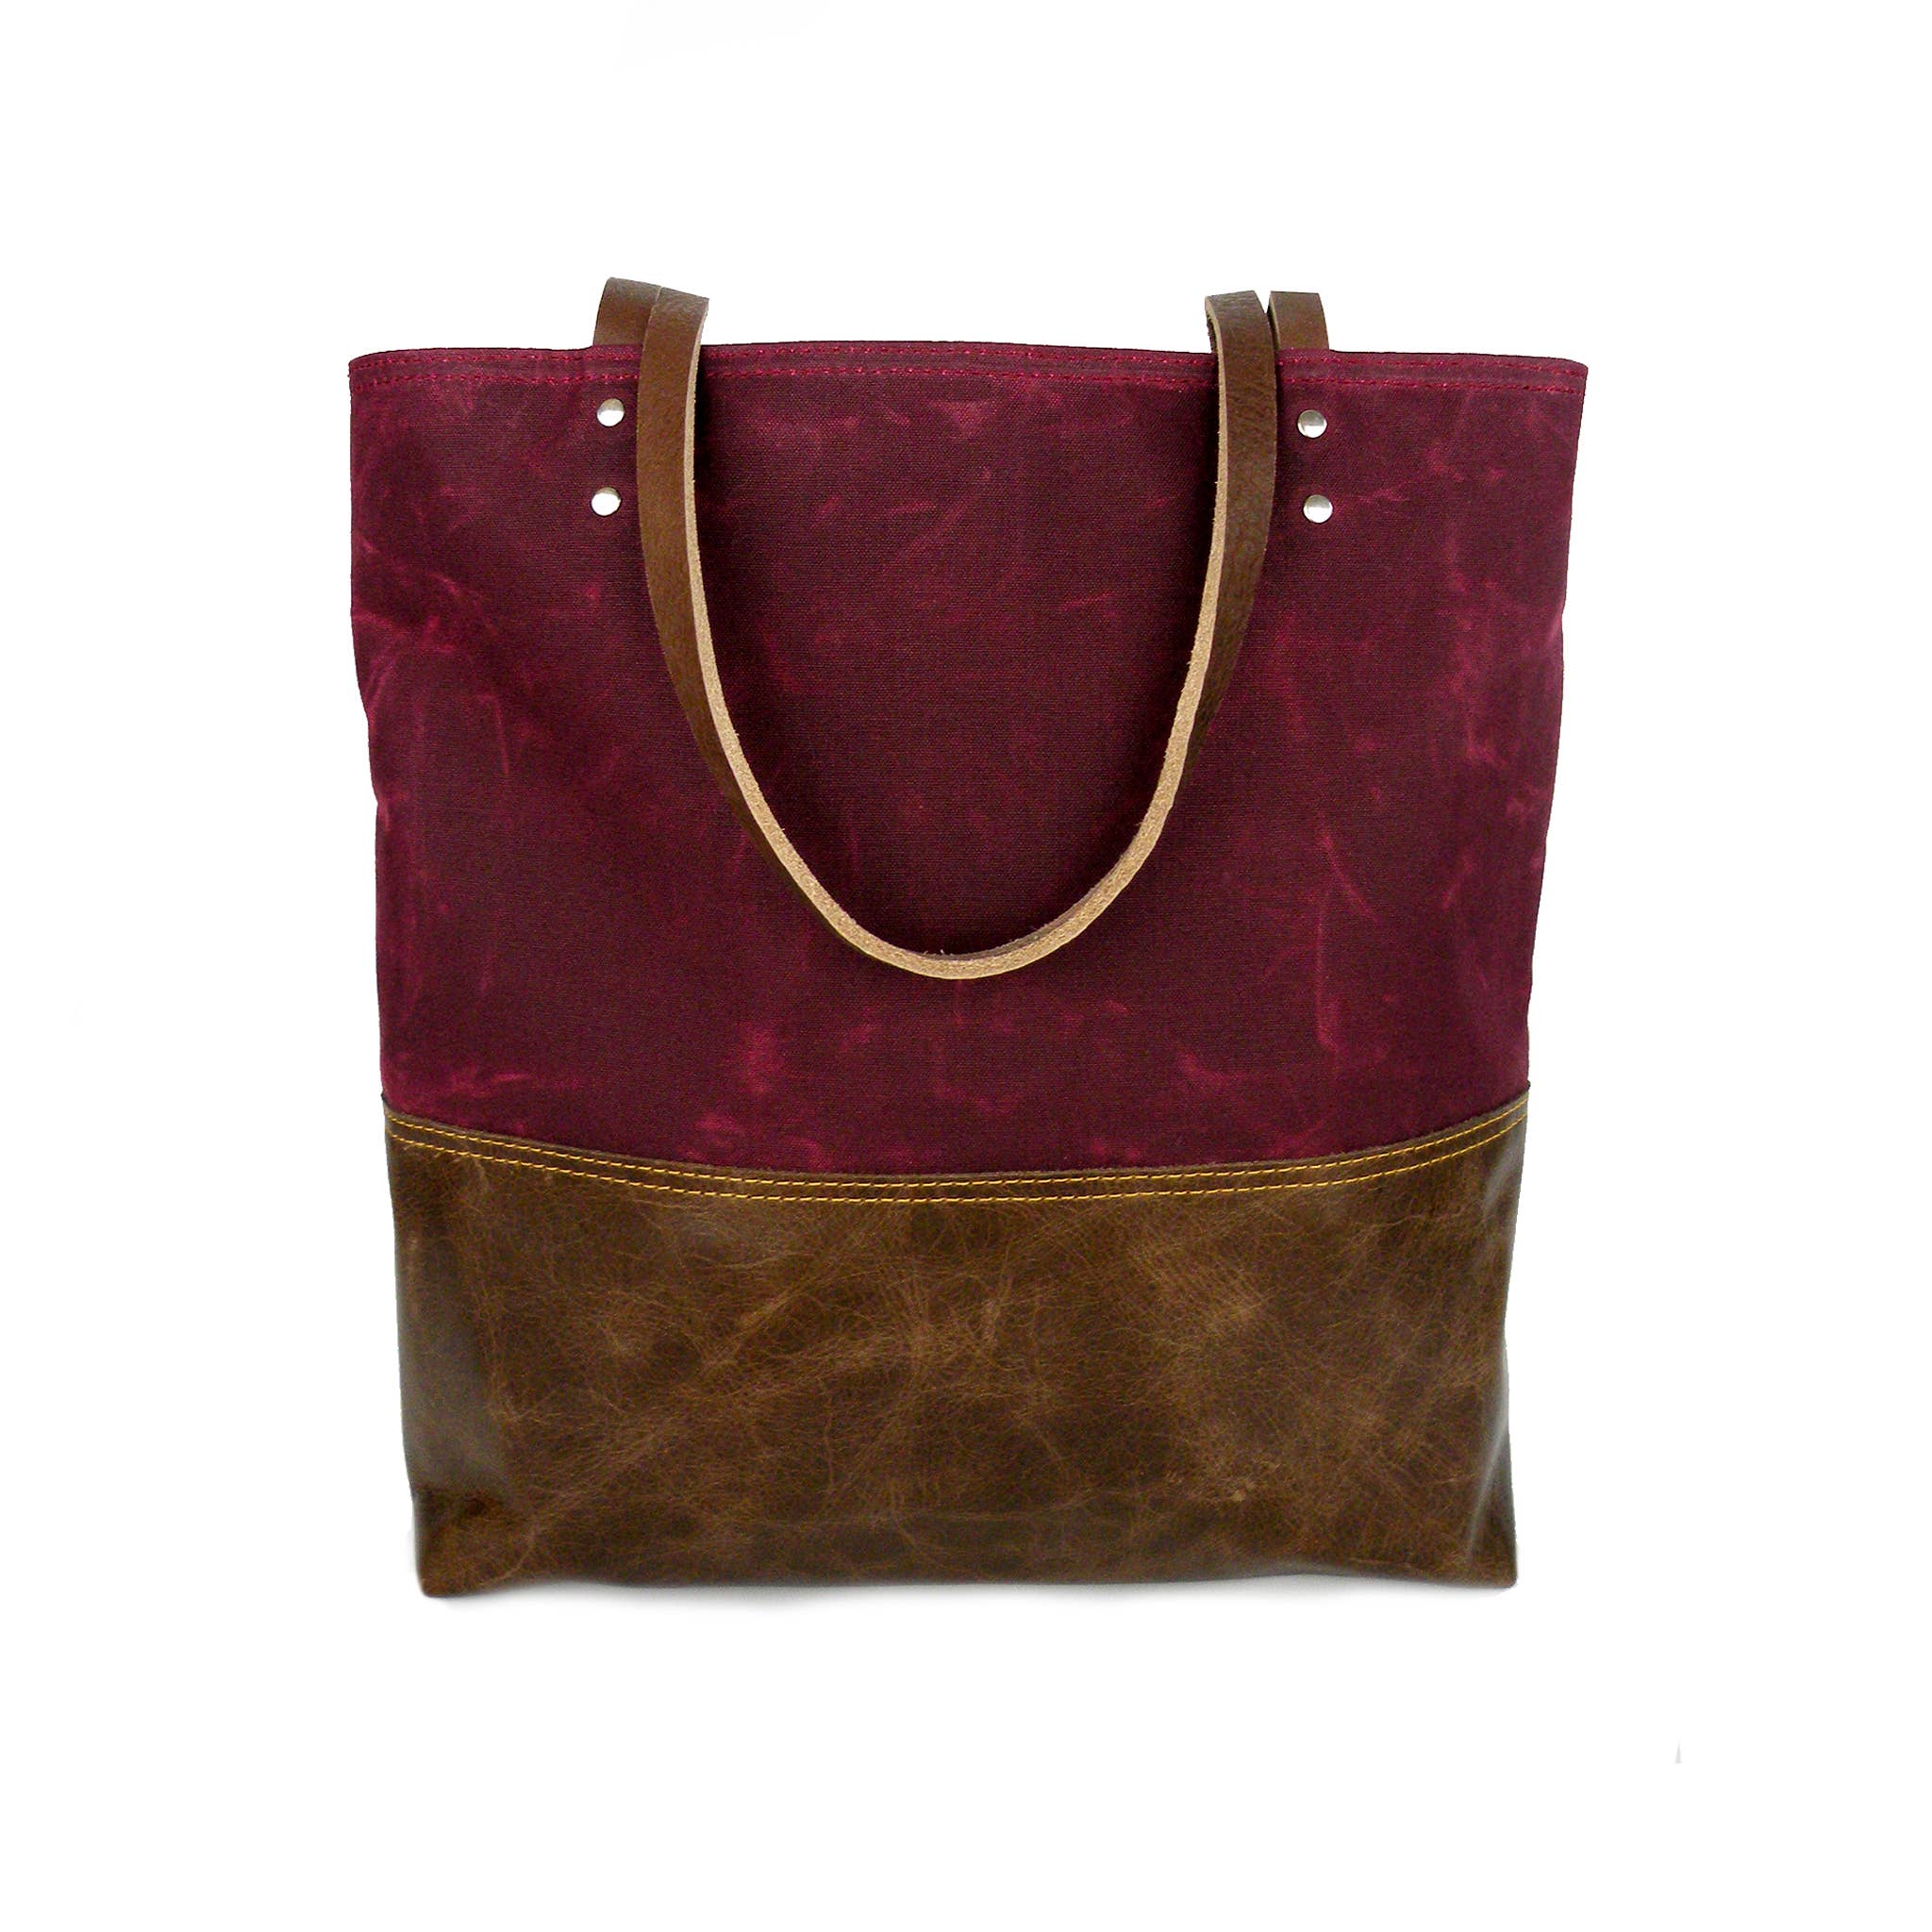 Urban Tote in Burgundy Waxed Canvas and Distressed Leather